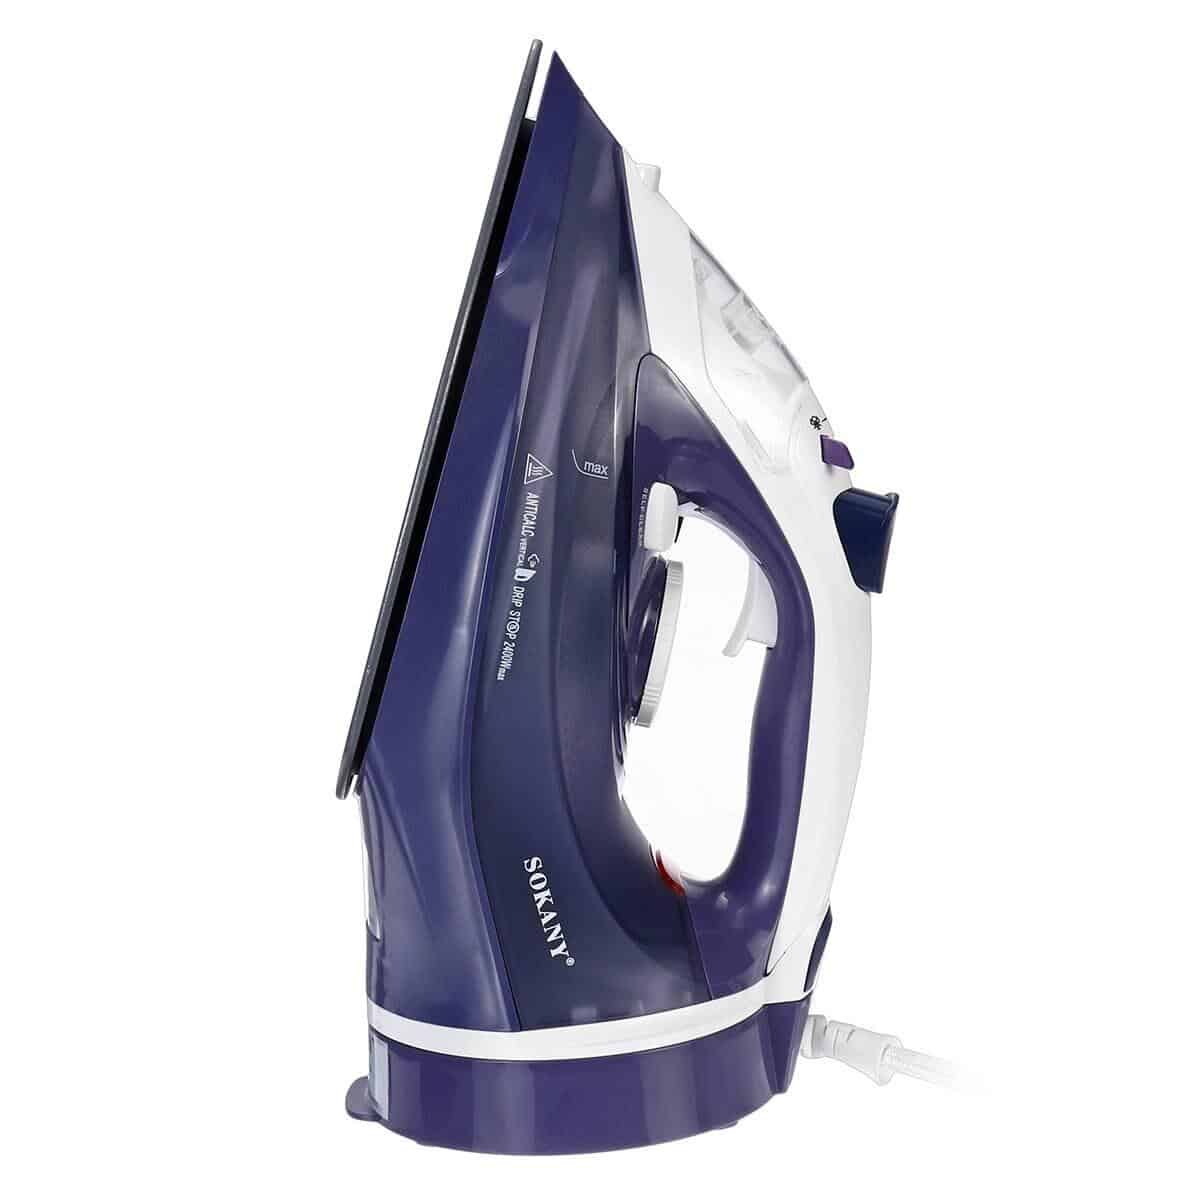 2400W Cordless Electric Steam Iron 2 in 1 Ceramic Soleplate Garment Steamer Travel Home Iron Ironing Machine New Arrival 2020